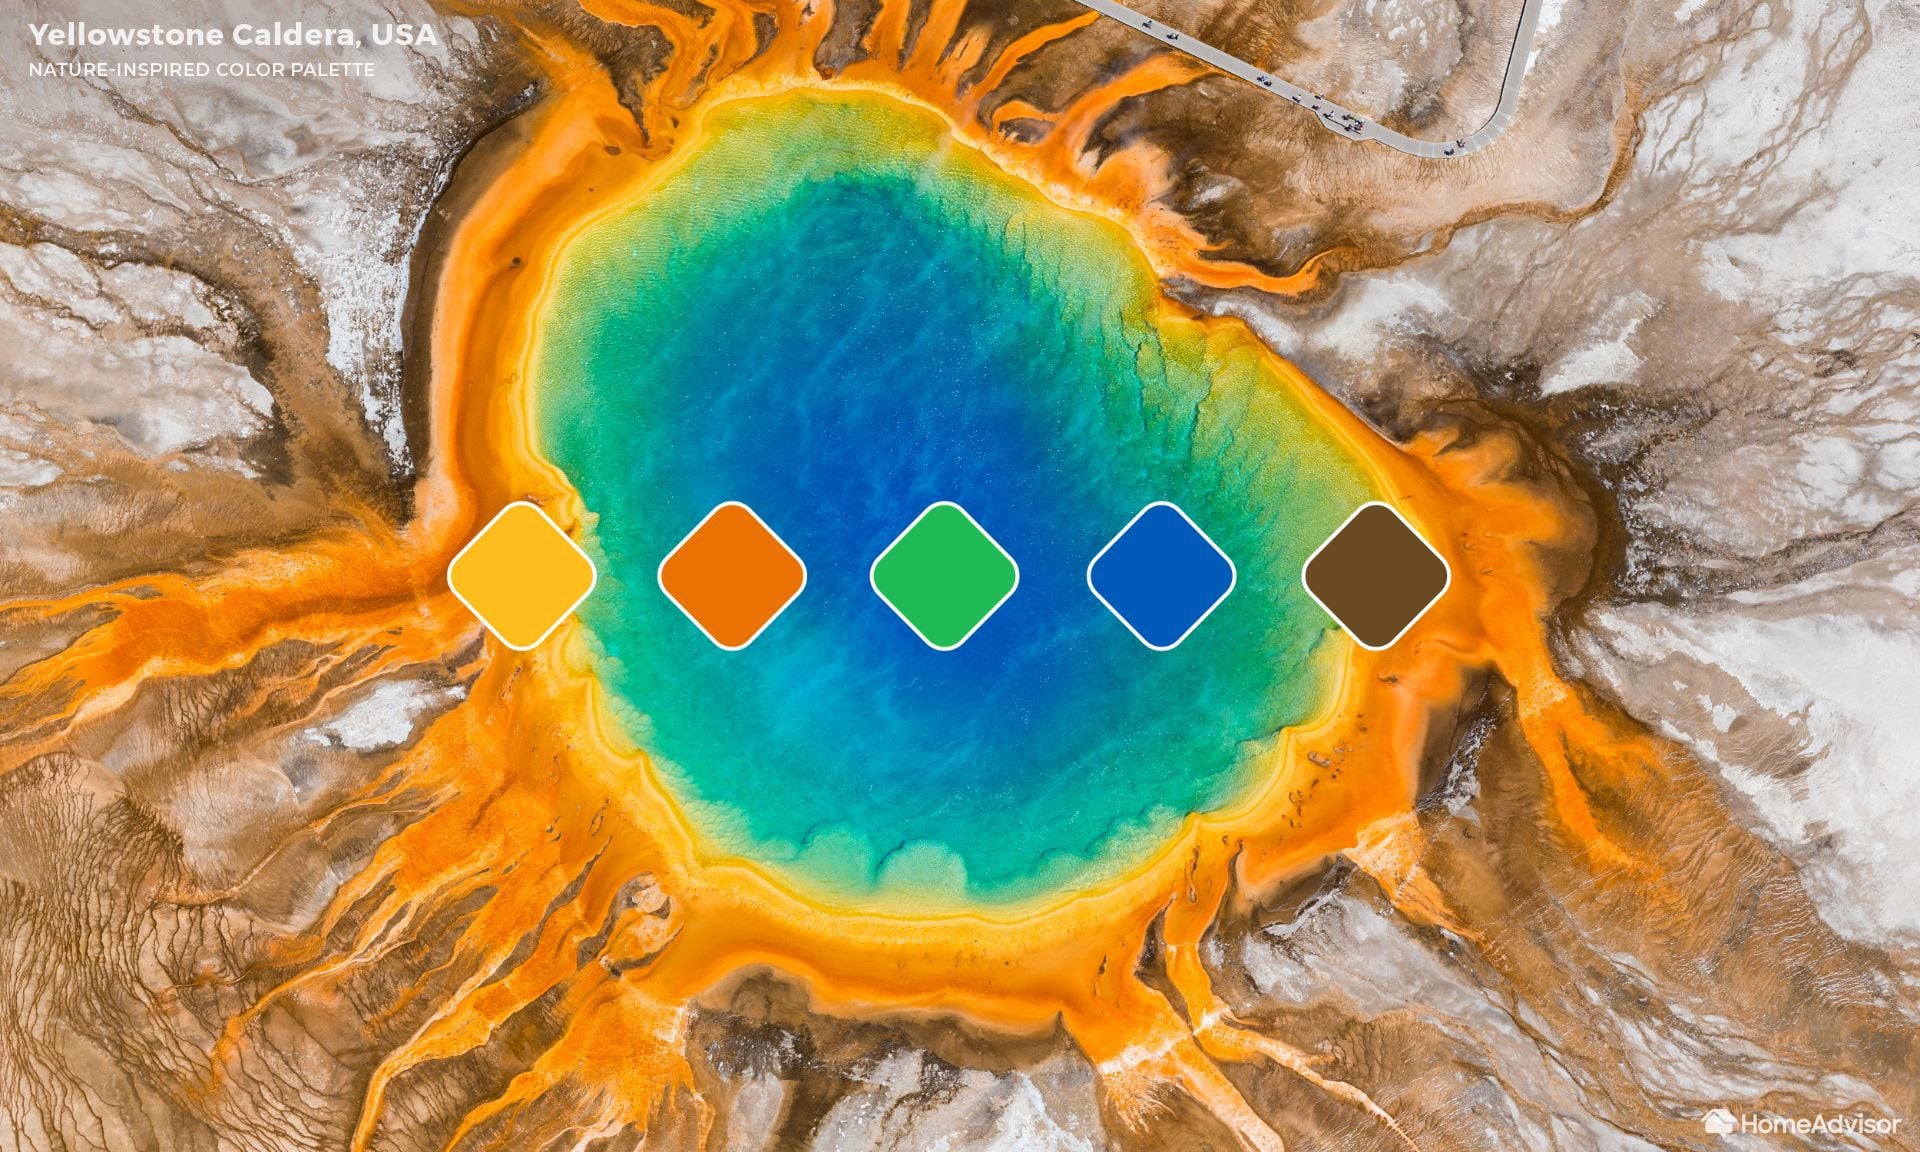 This Yellowstone Caldera-inspired color palette plays off the famed site's intense shades of orange, brown, yellow, blue, and green. 